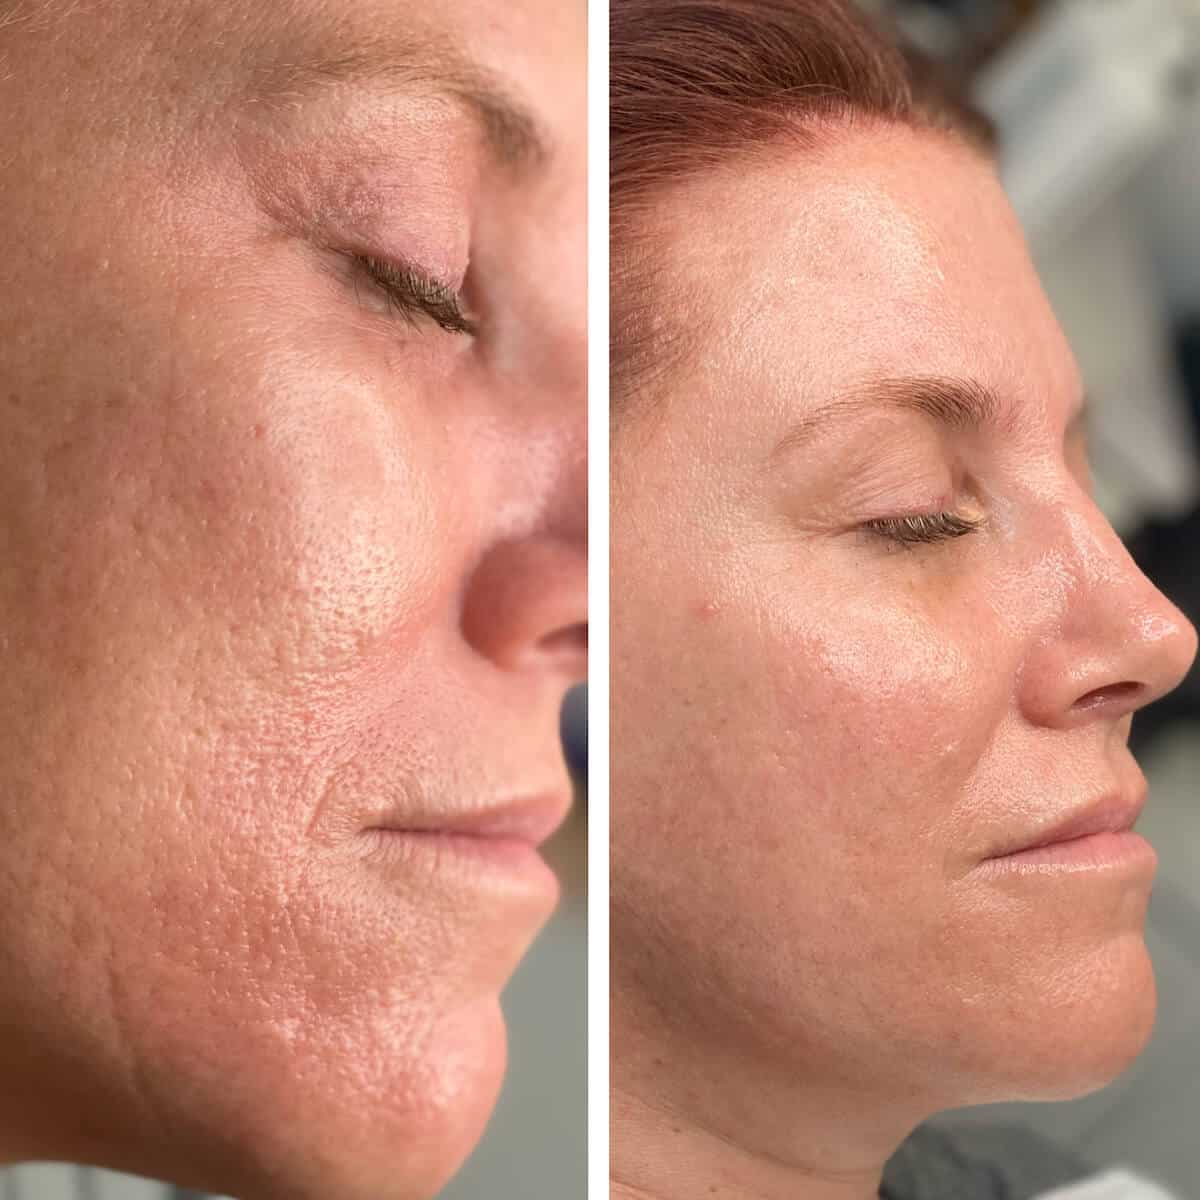 Smoother Skin Texture Results With Microneedling In Phoenix, Az - Waters Aesthetics